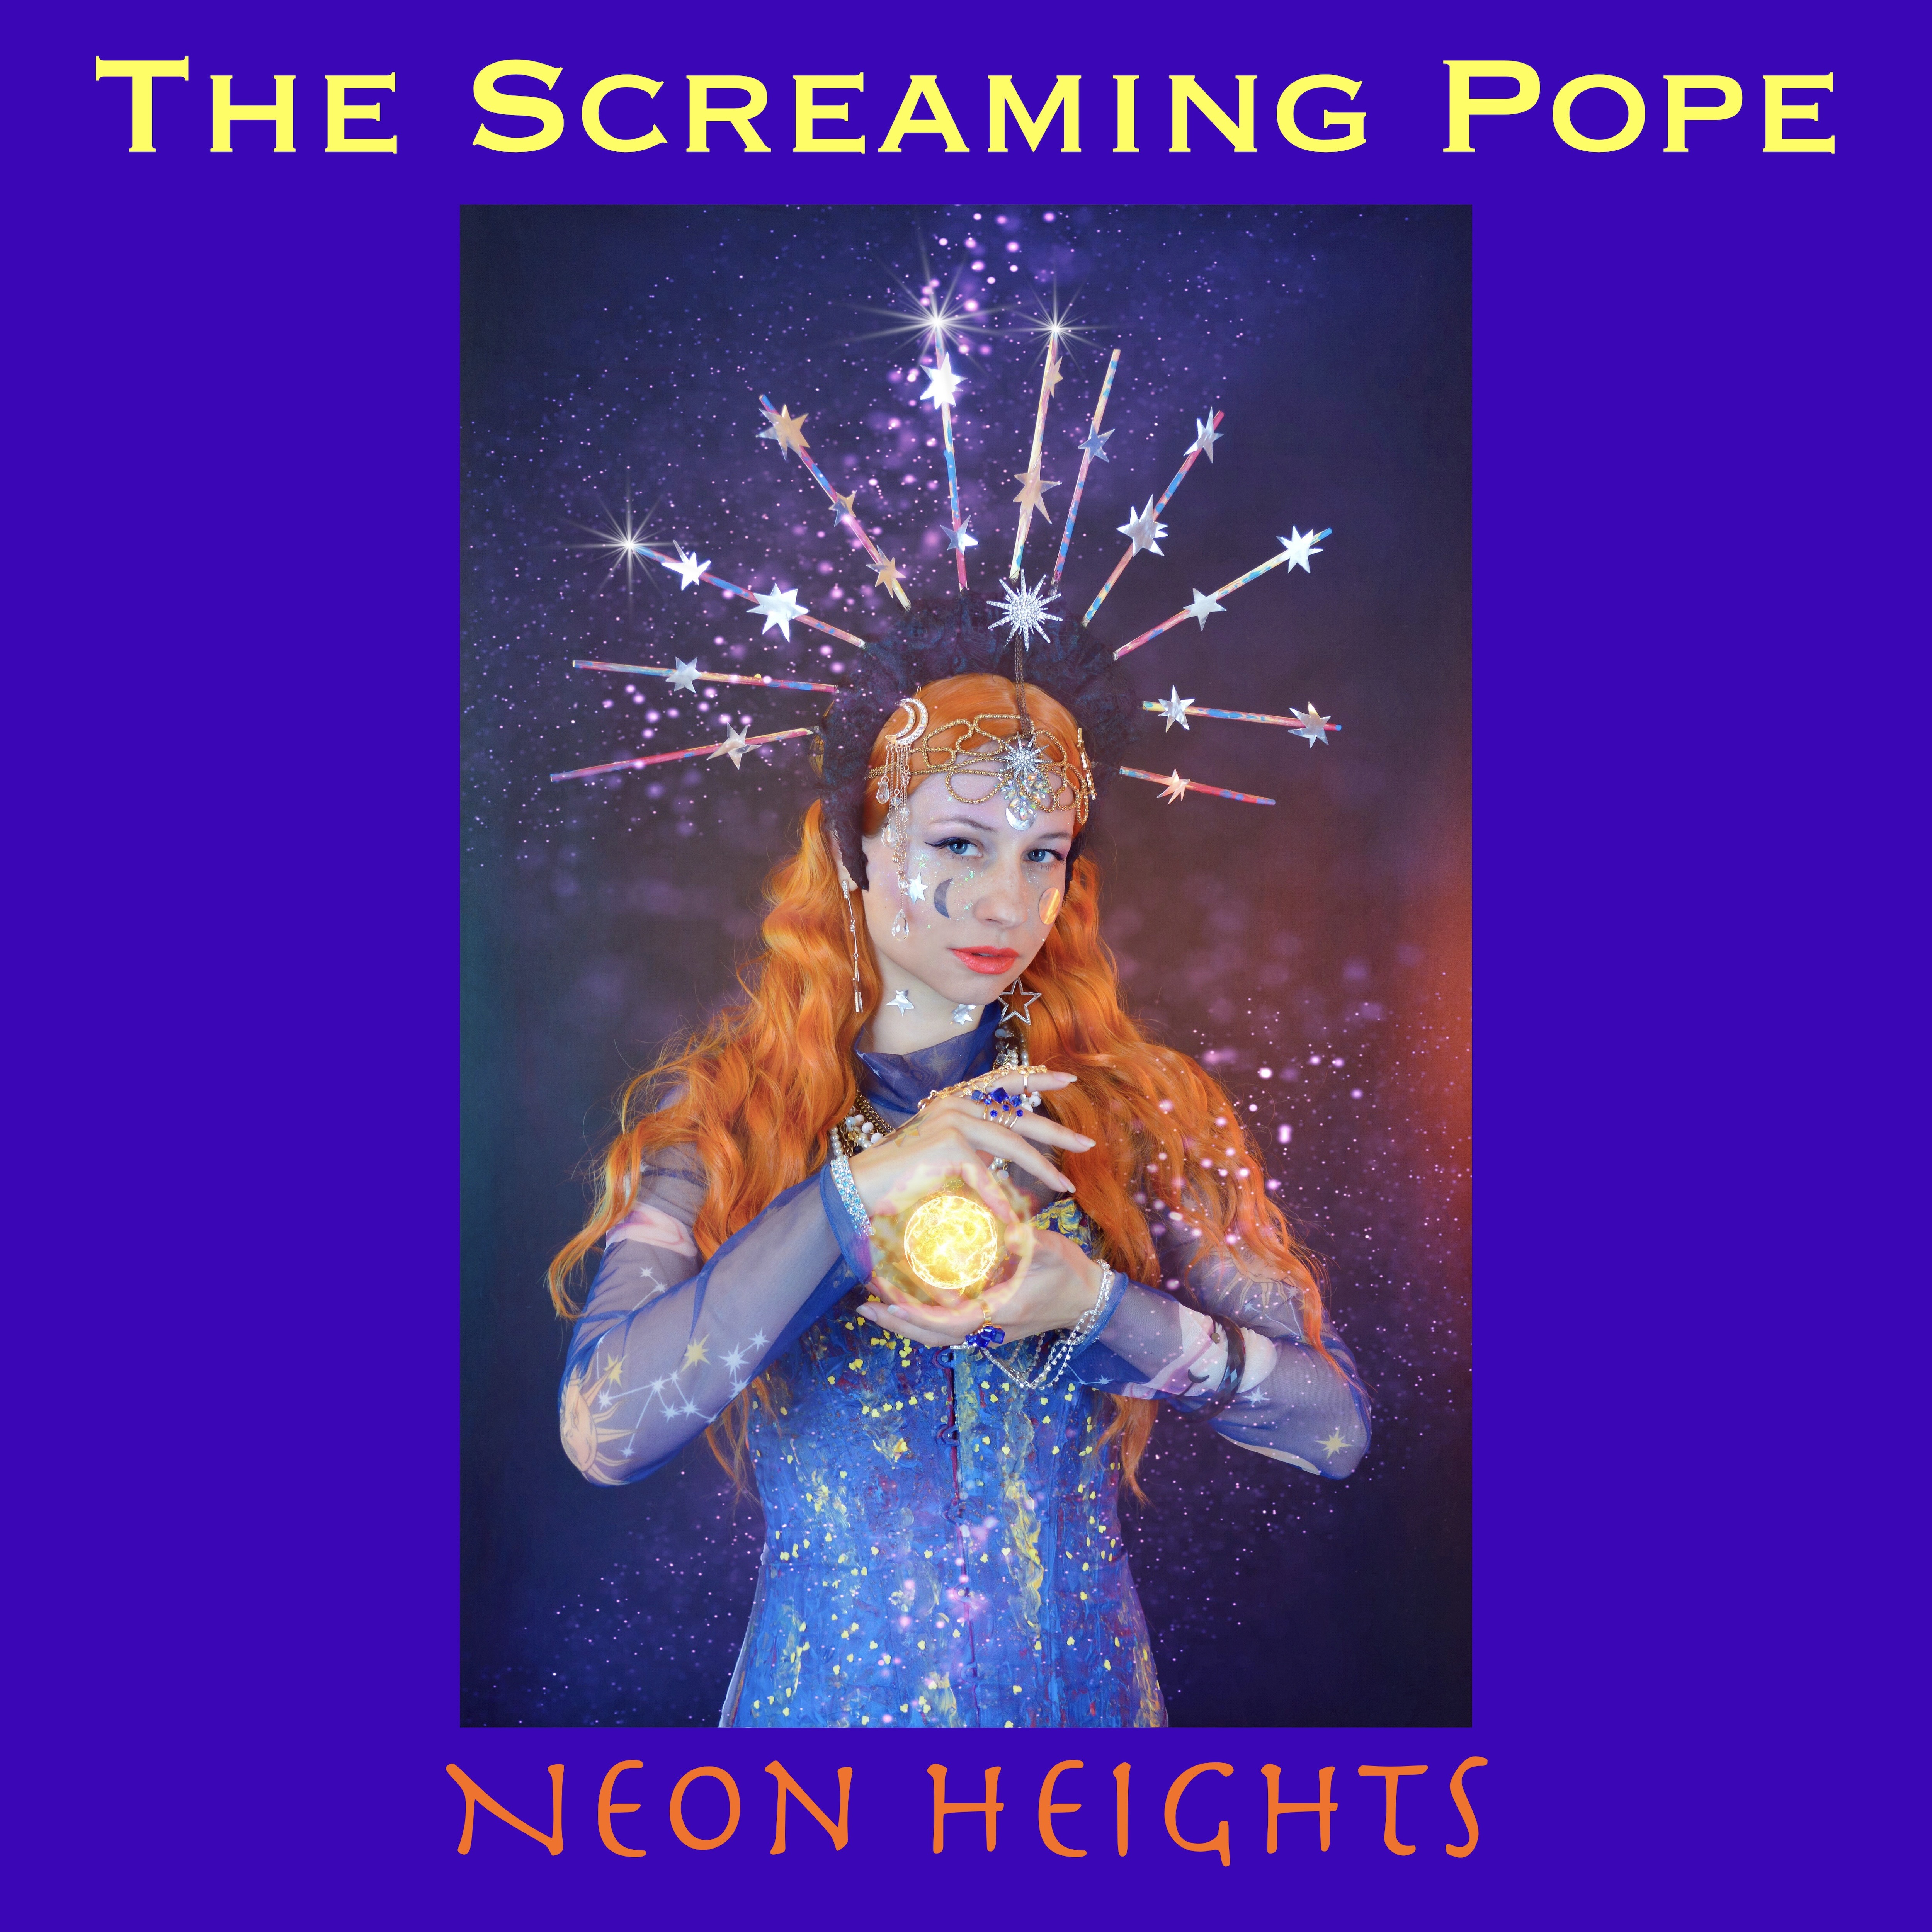 The Screaming Pope – Neon Heights